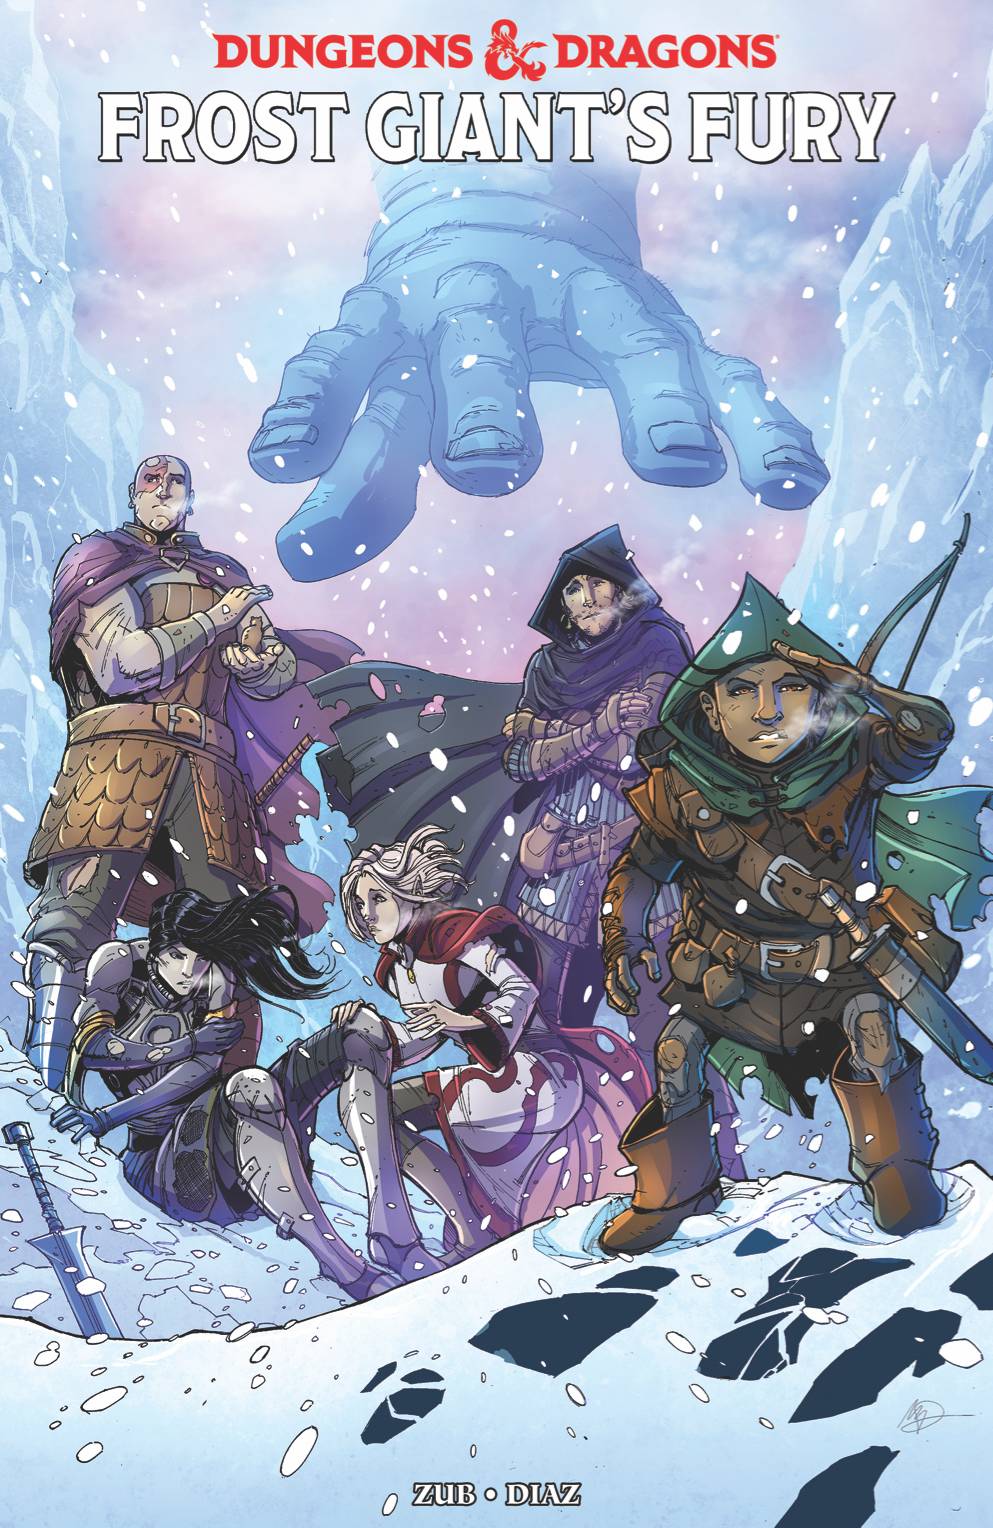 Dungeons & Dragons Frost Giants Fury Graphic Novel